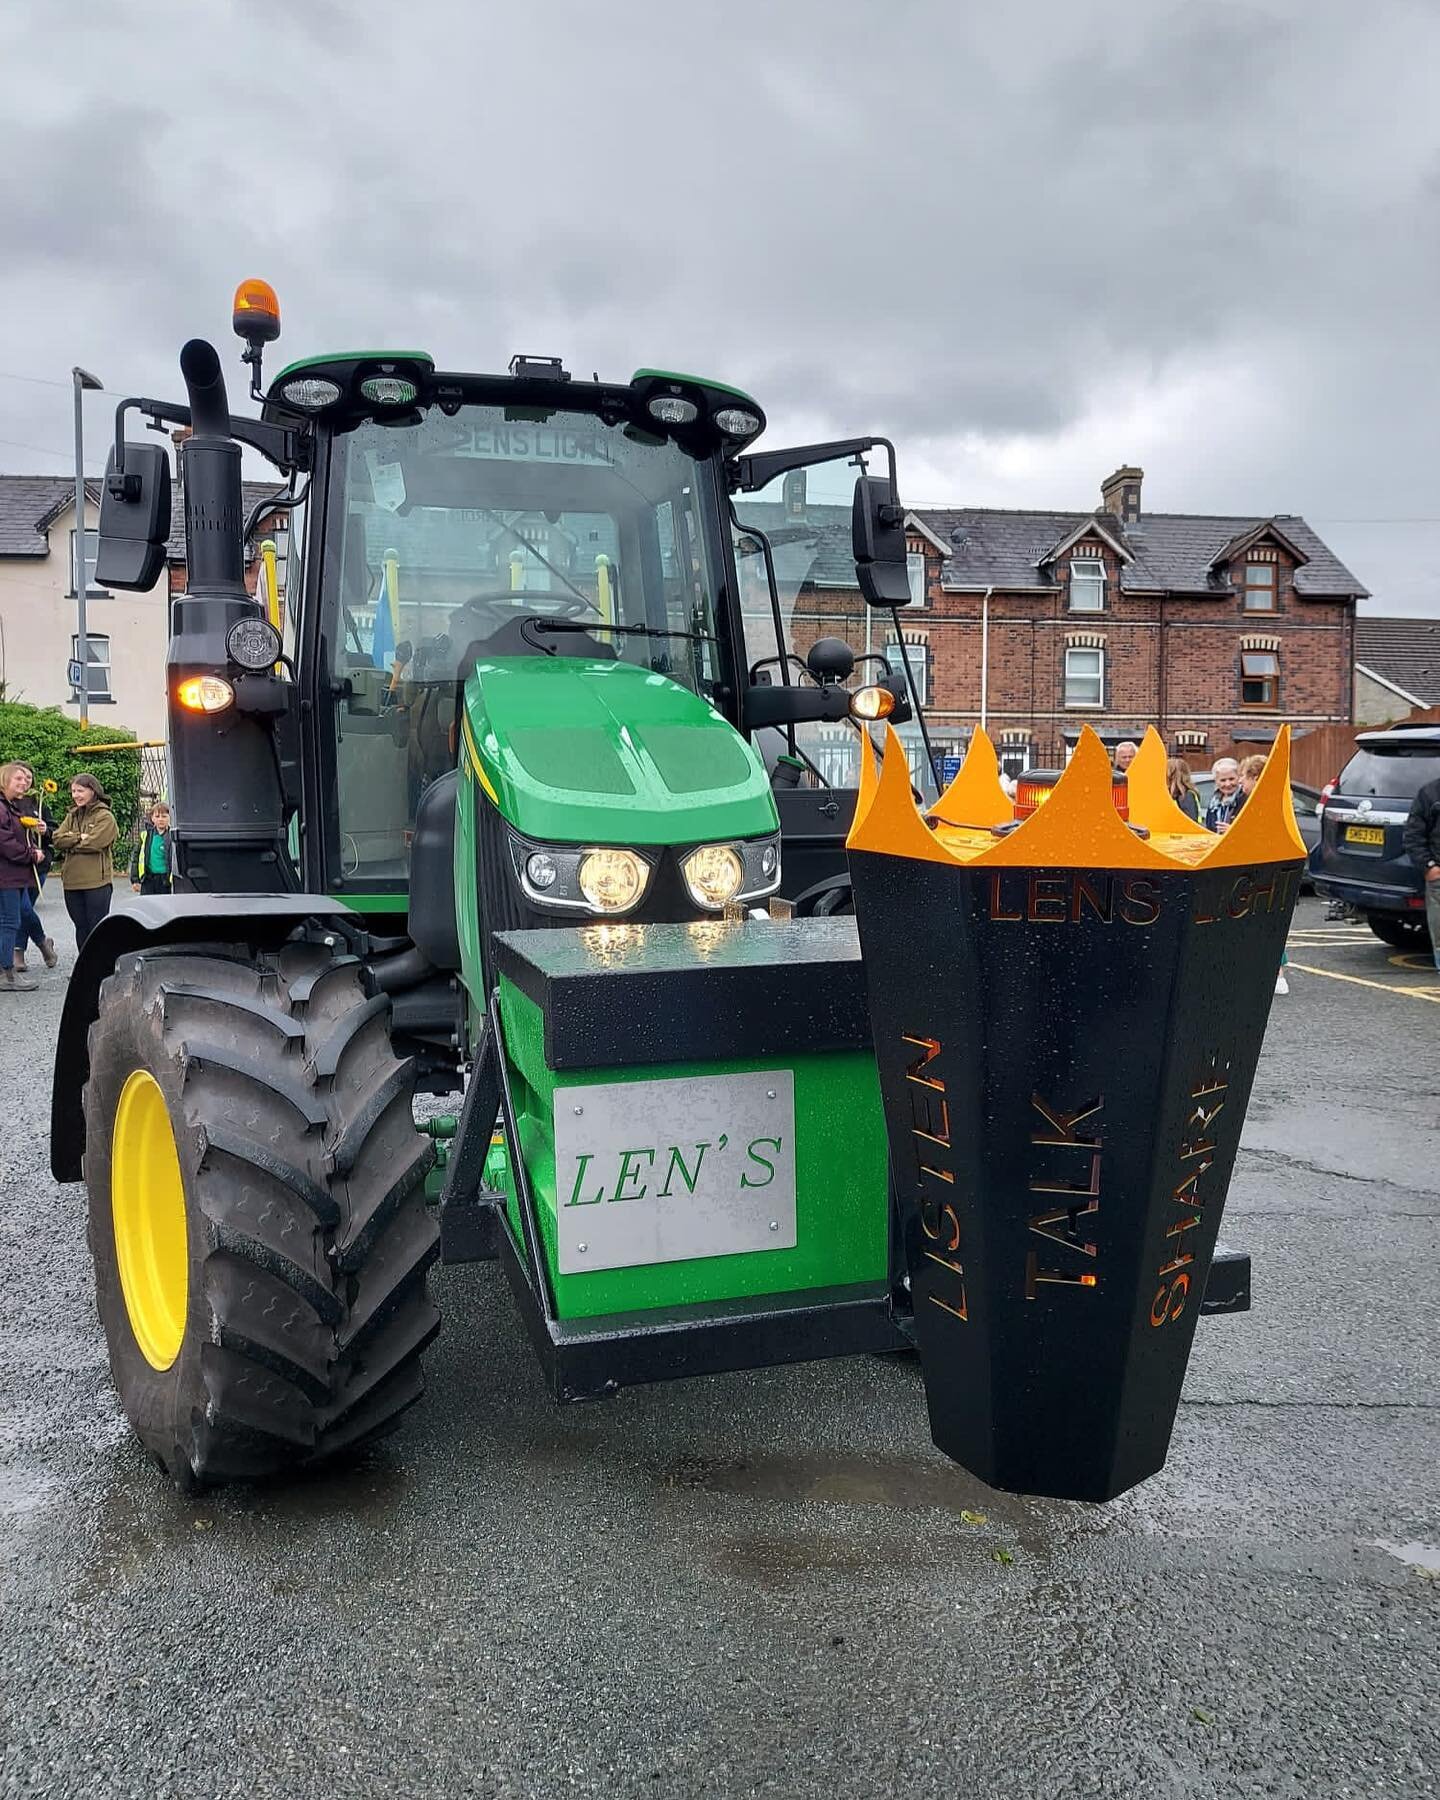 Today marks one month since Radnor YFC members met at Rhayader Smithfield Market and Builth Wells Market to welcome Andy &amp; Lynda Eadon on day 21 and 22 of their &lsquo;Len&rsquo;s Light&rsquo; tractor relay 🚜

@lens_light2022 is a legacy for And